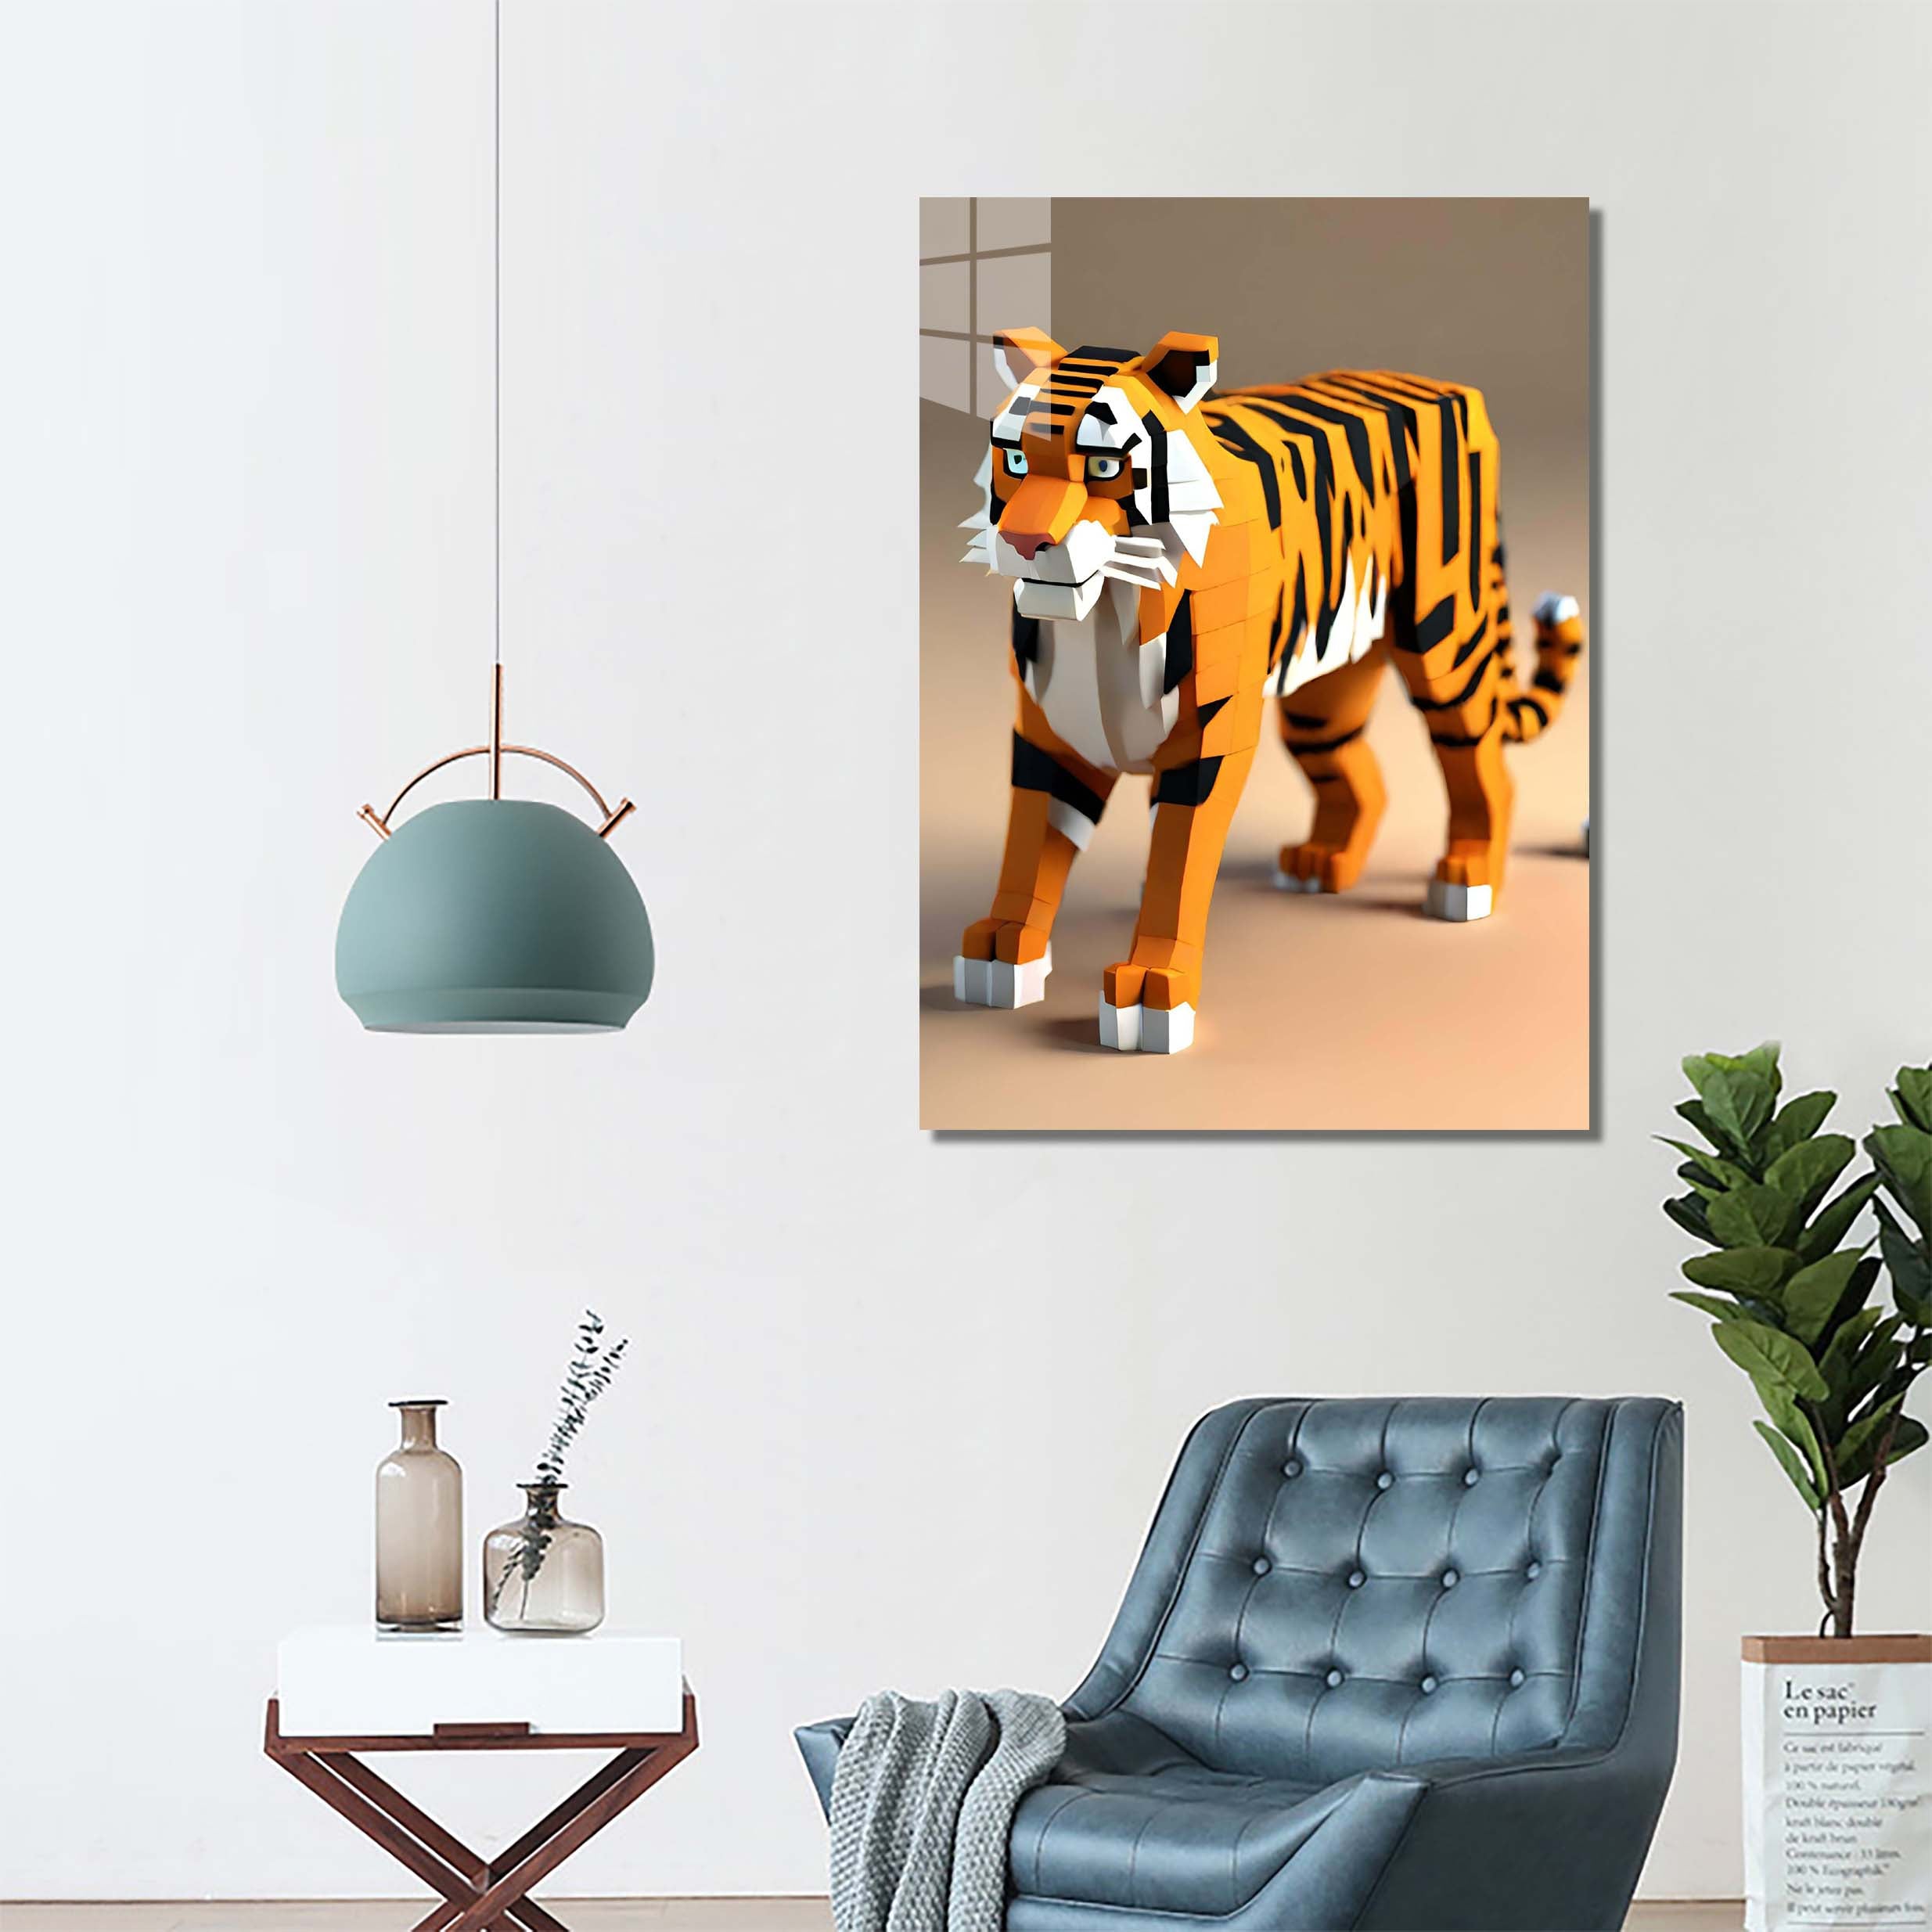 Tiger 3D-designed by @DynCreative